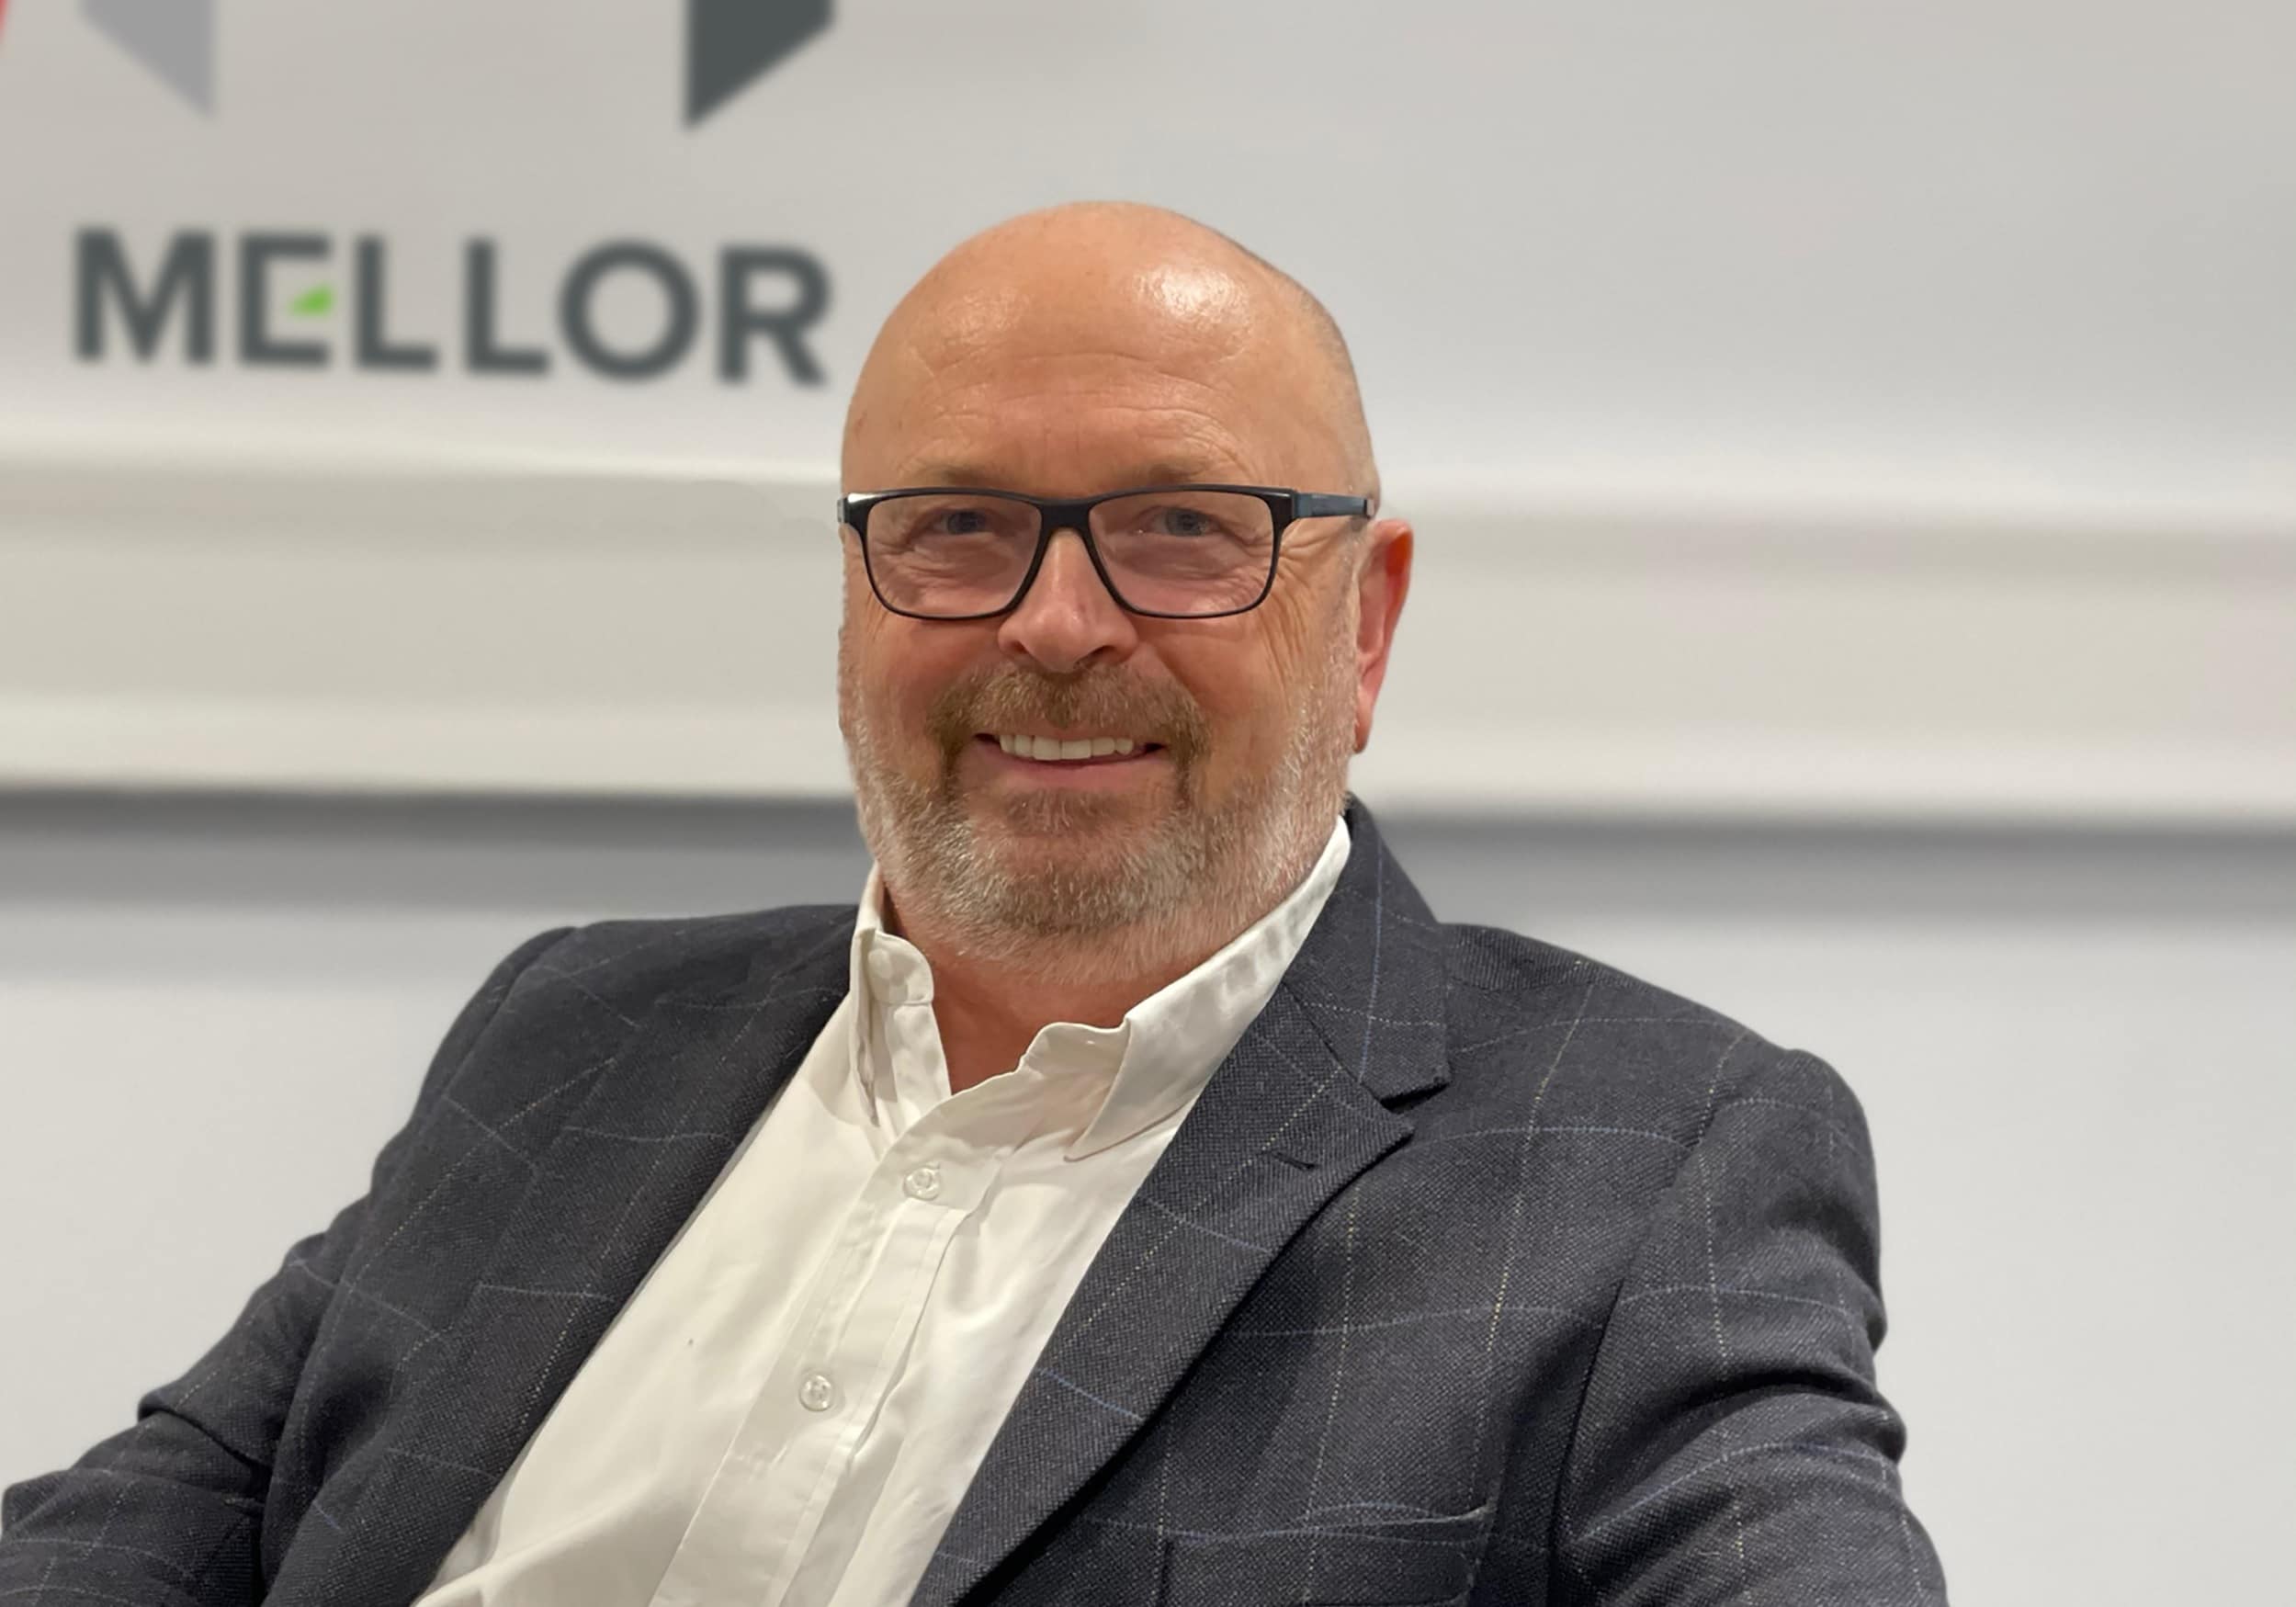 Mellor repositioning to become major player on UK bus scene